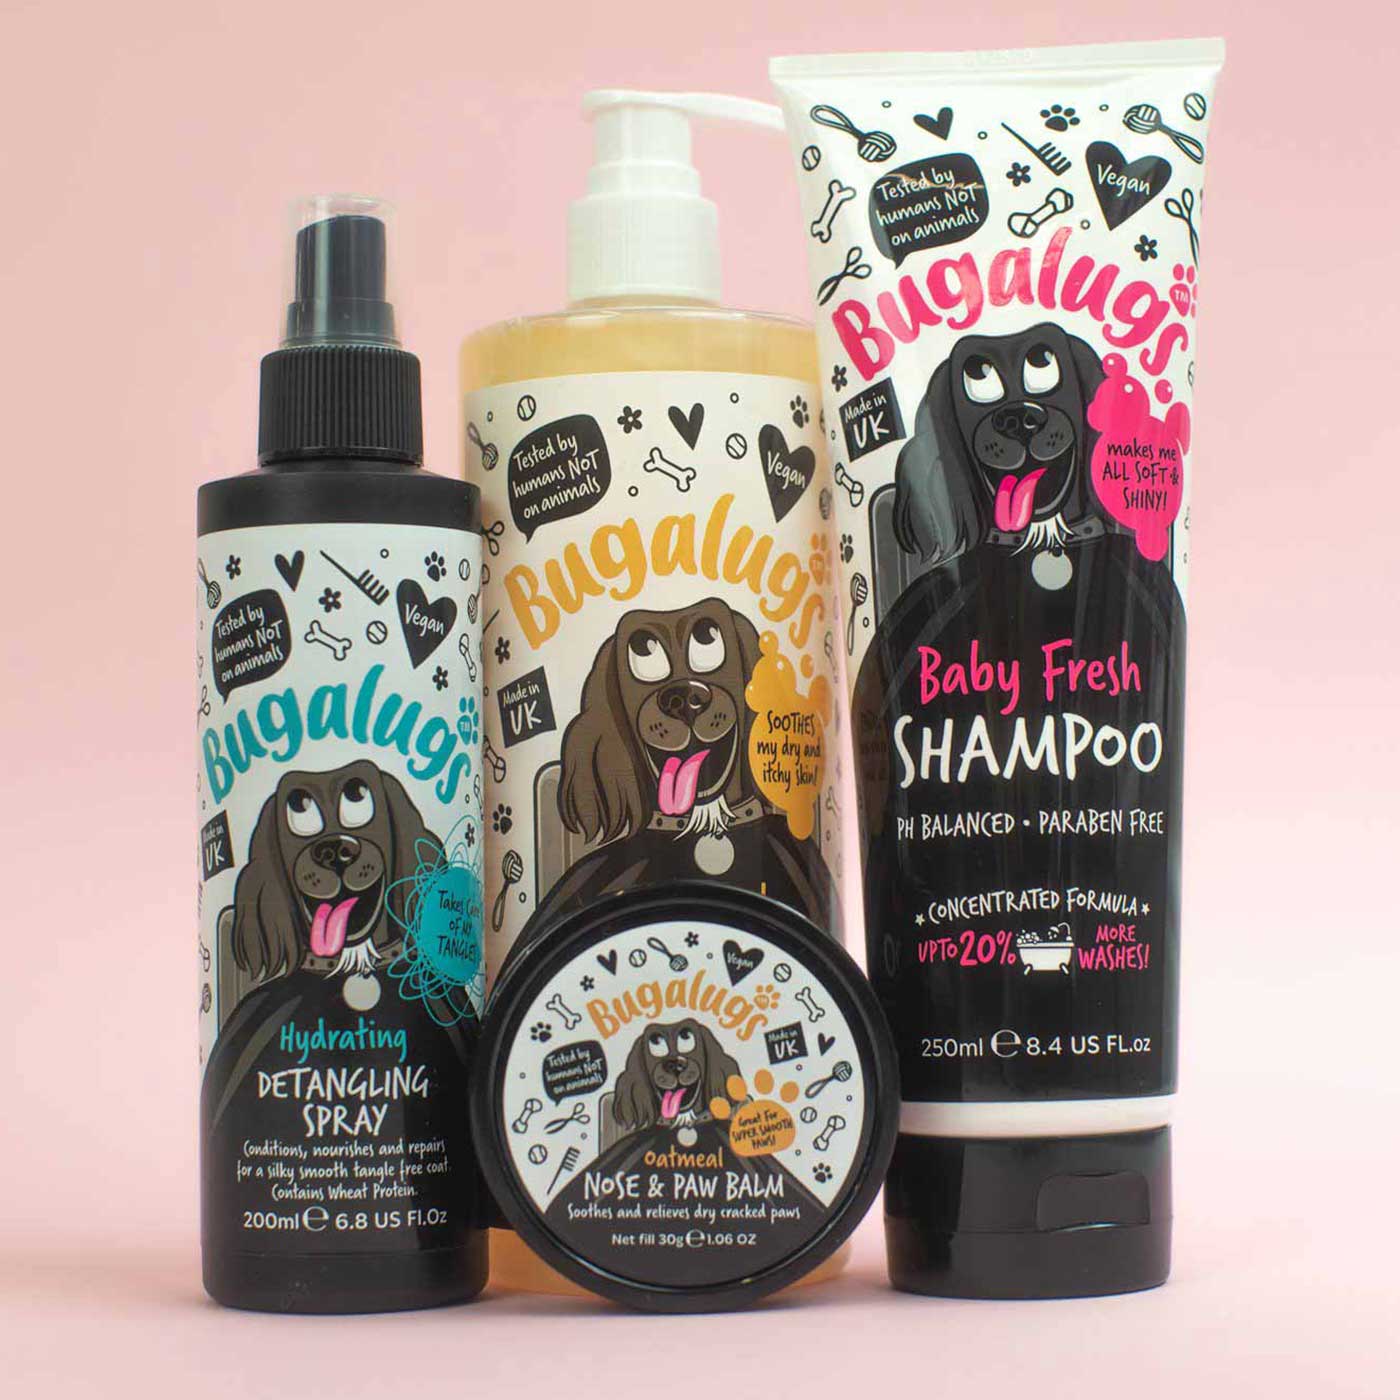 Discover, Bugalugs Baby Fresh Dog Shampoo. Perfect for removing odours, Vegan friendly, Soothes and nourishes the coat and skin, PH balanced and sensitive. now available at Lords and Labradors in three sizes